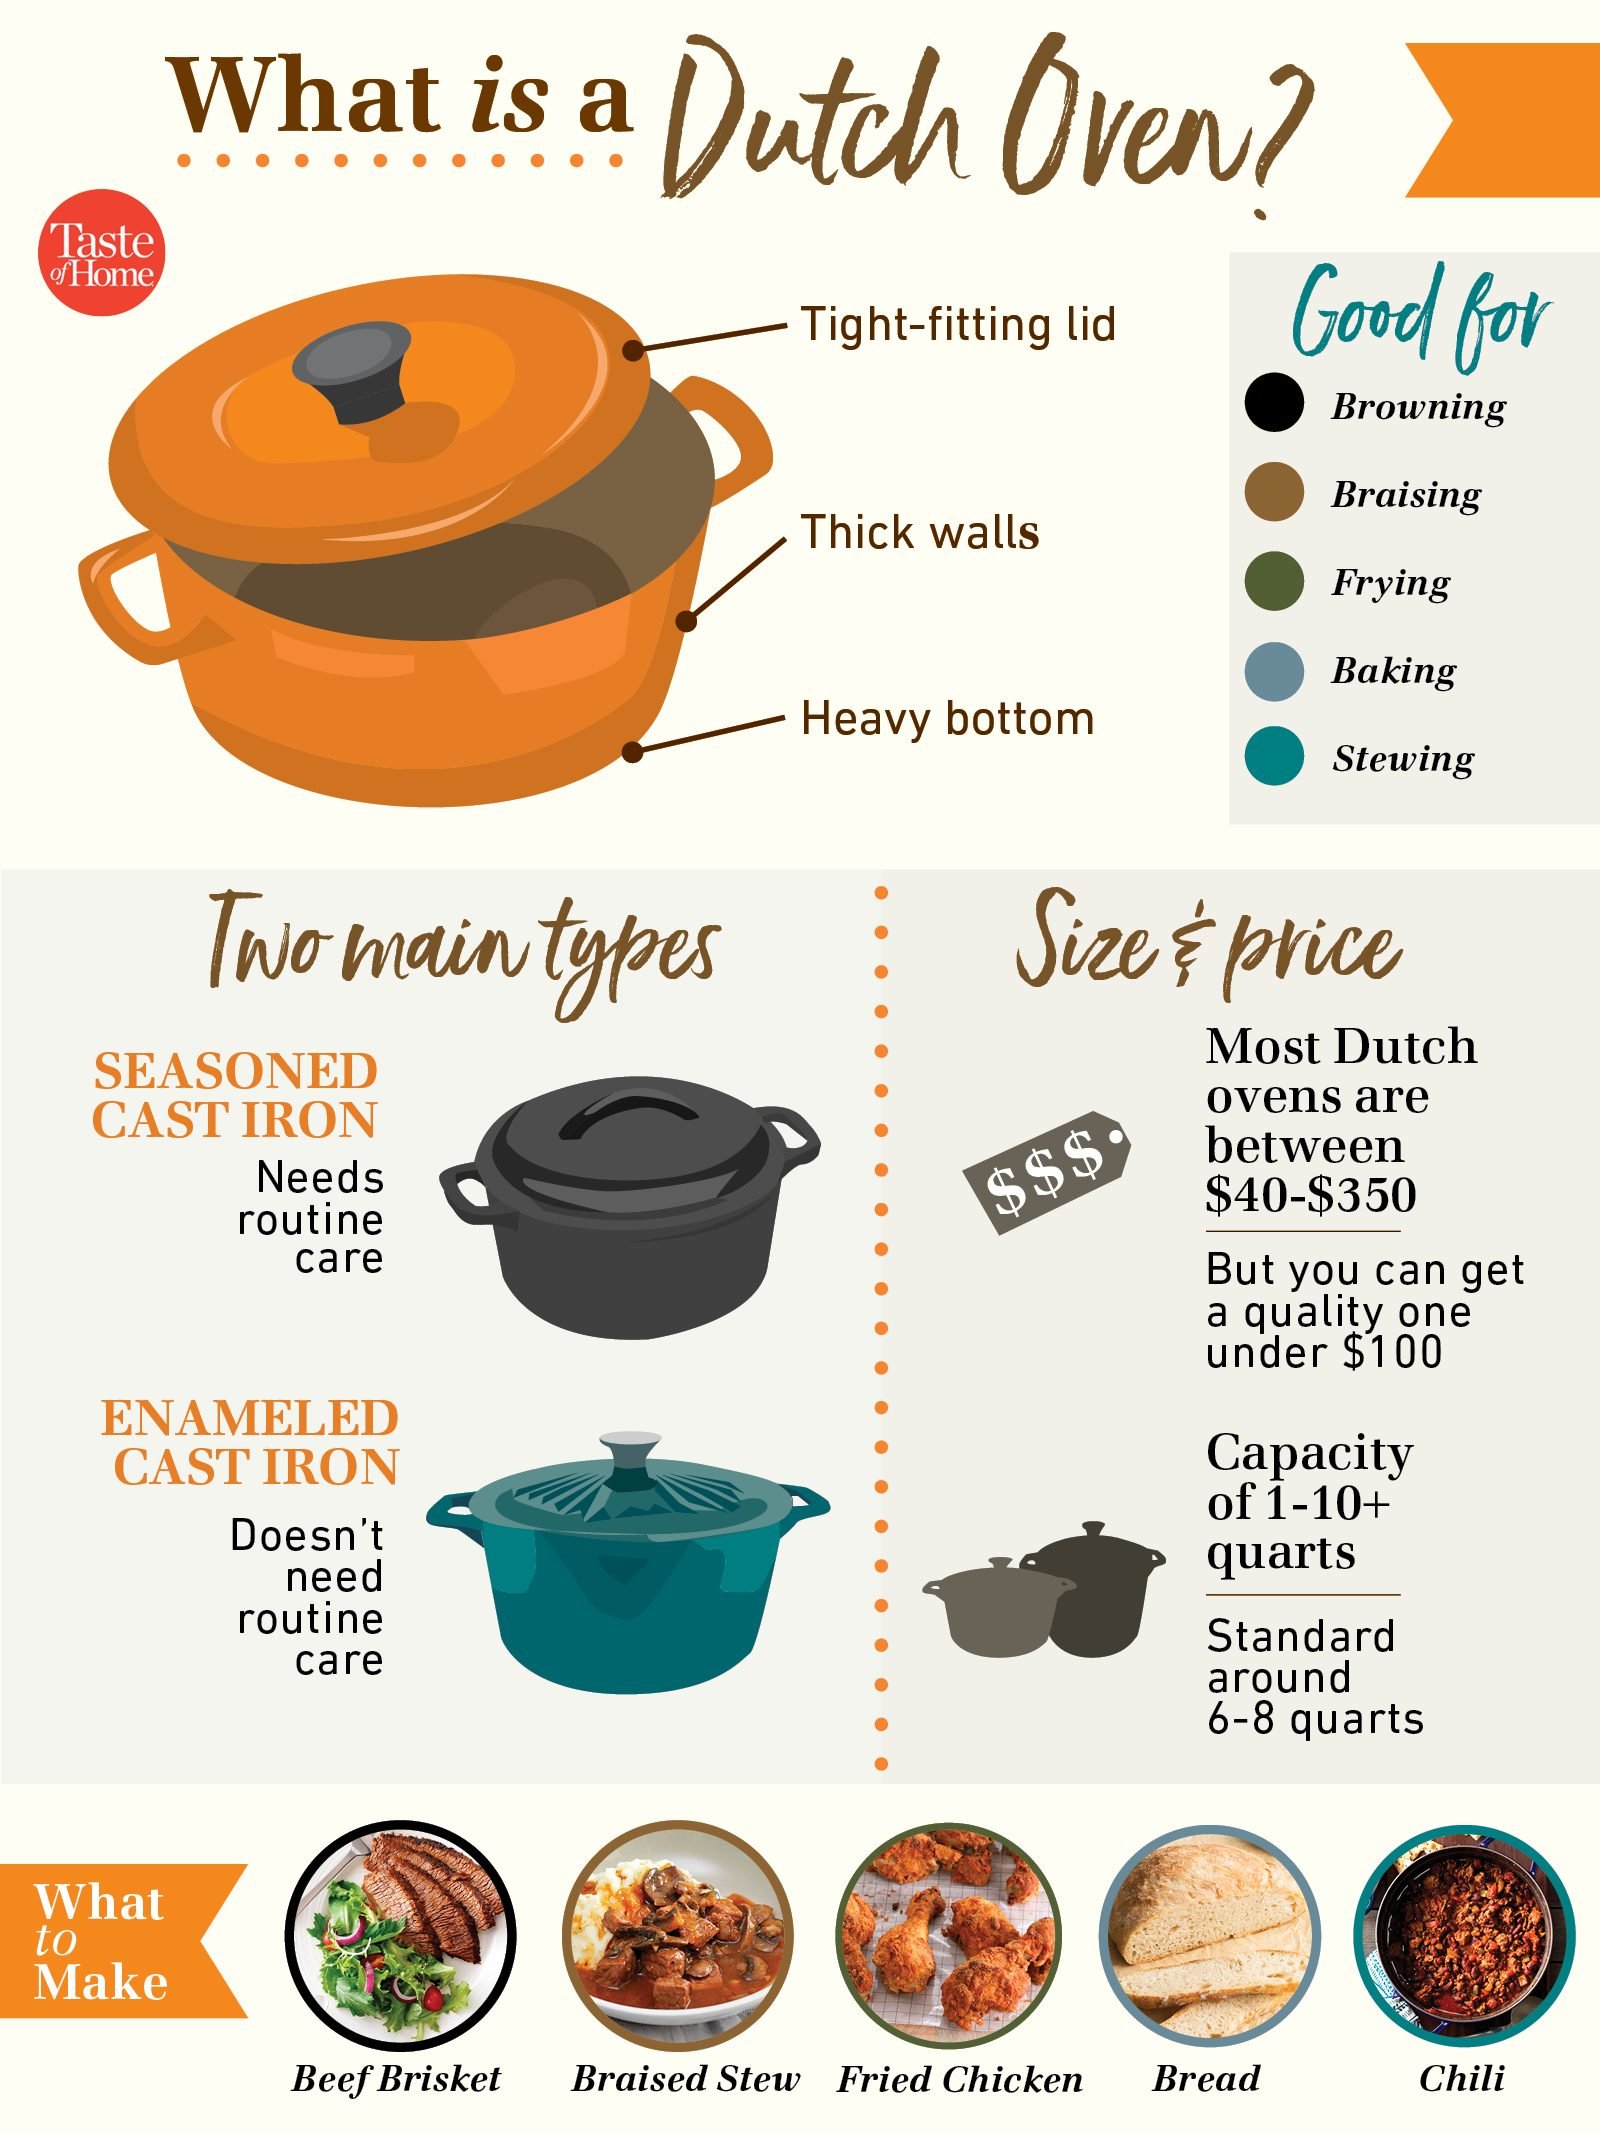 https://www.tasteofhome.com/wp-content/uploads/2020/06/What-is-a-dutch-oven_graphic.jpg?fit=680%2C907